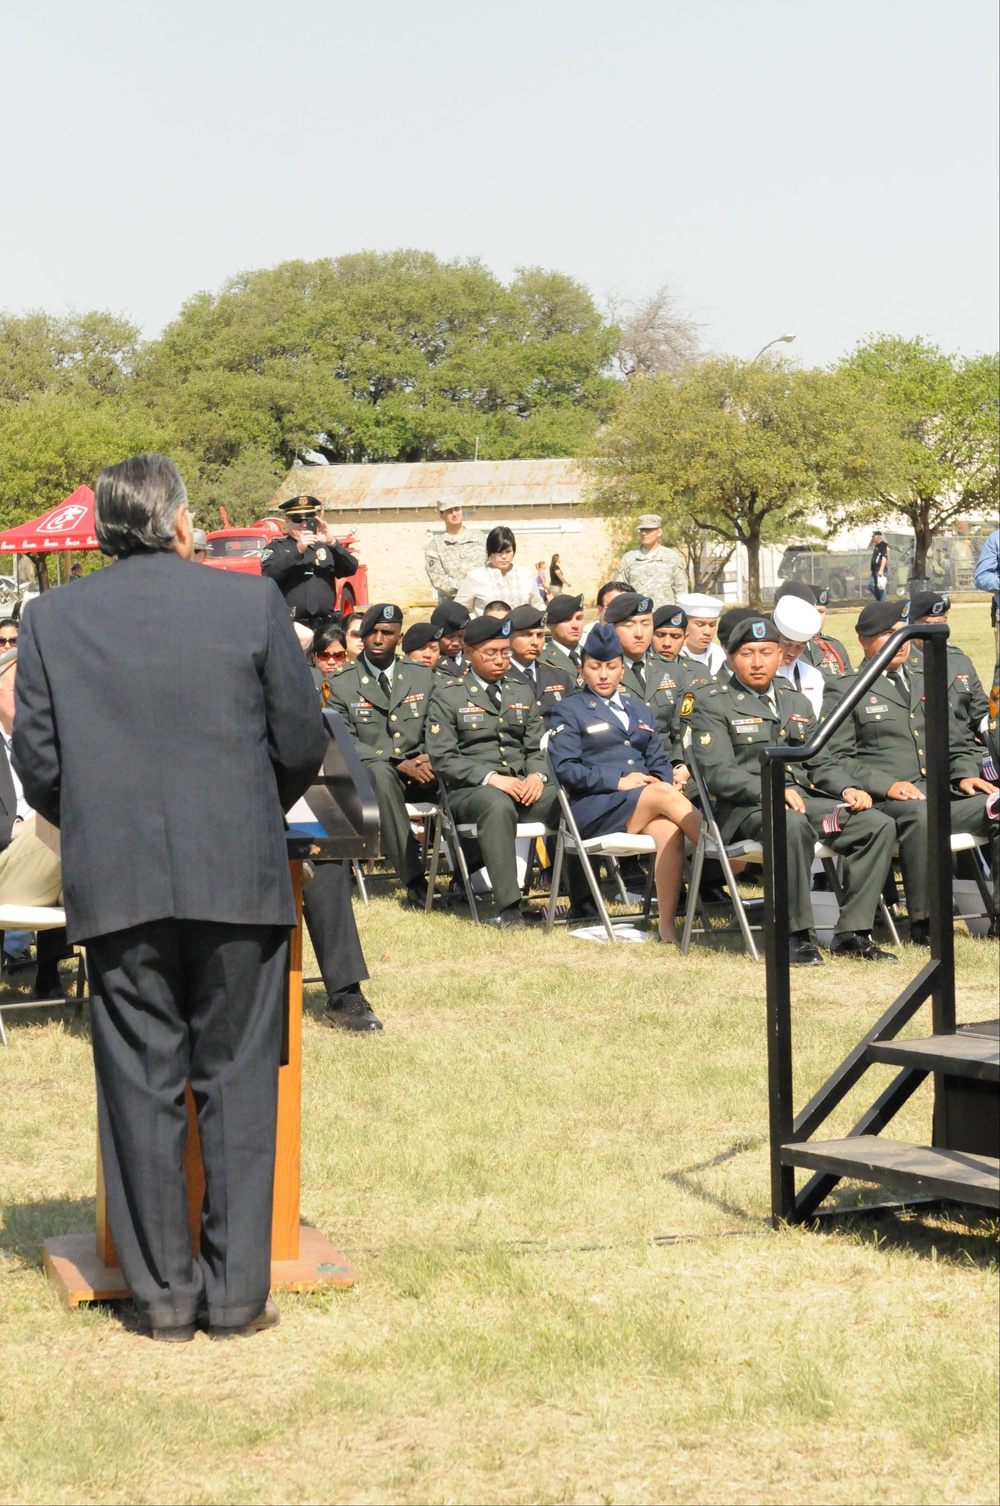 Service members participate in naturalization ceremony during American Heroes Air Show on Camp Mabry